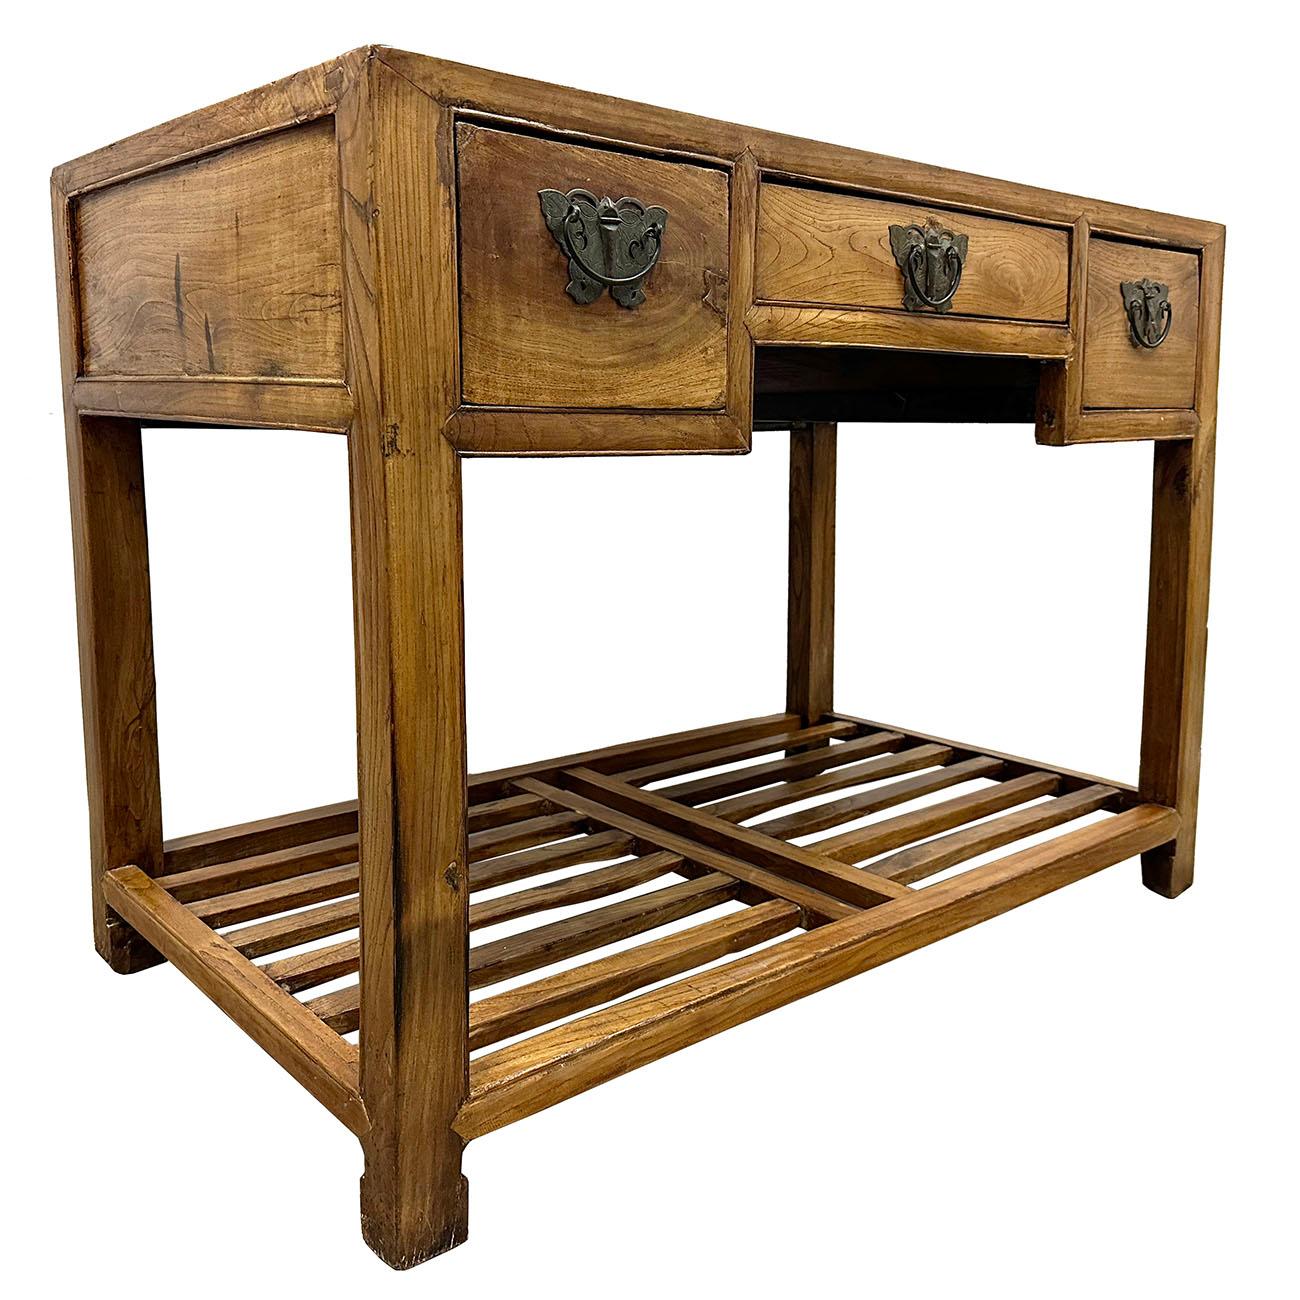 This beautiful carved secretary/writing desk is traditional simply design with three drawers on the front and lattice foot rest on the bottom. Both sides and back are finished. It was made from solid elm wood with carved bronze hardware on the